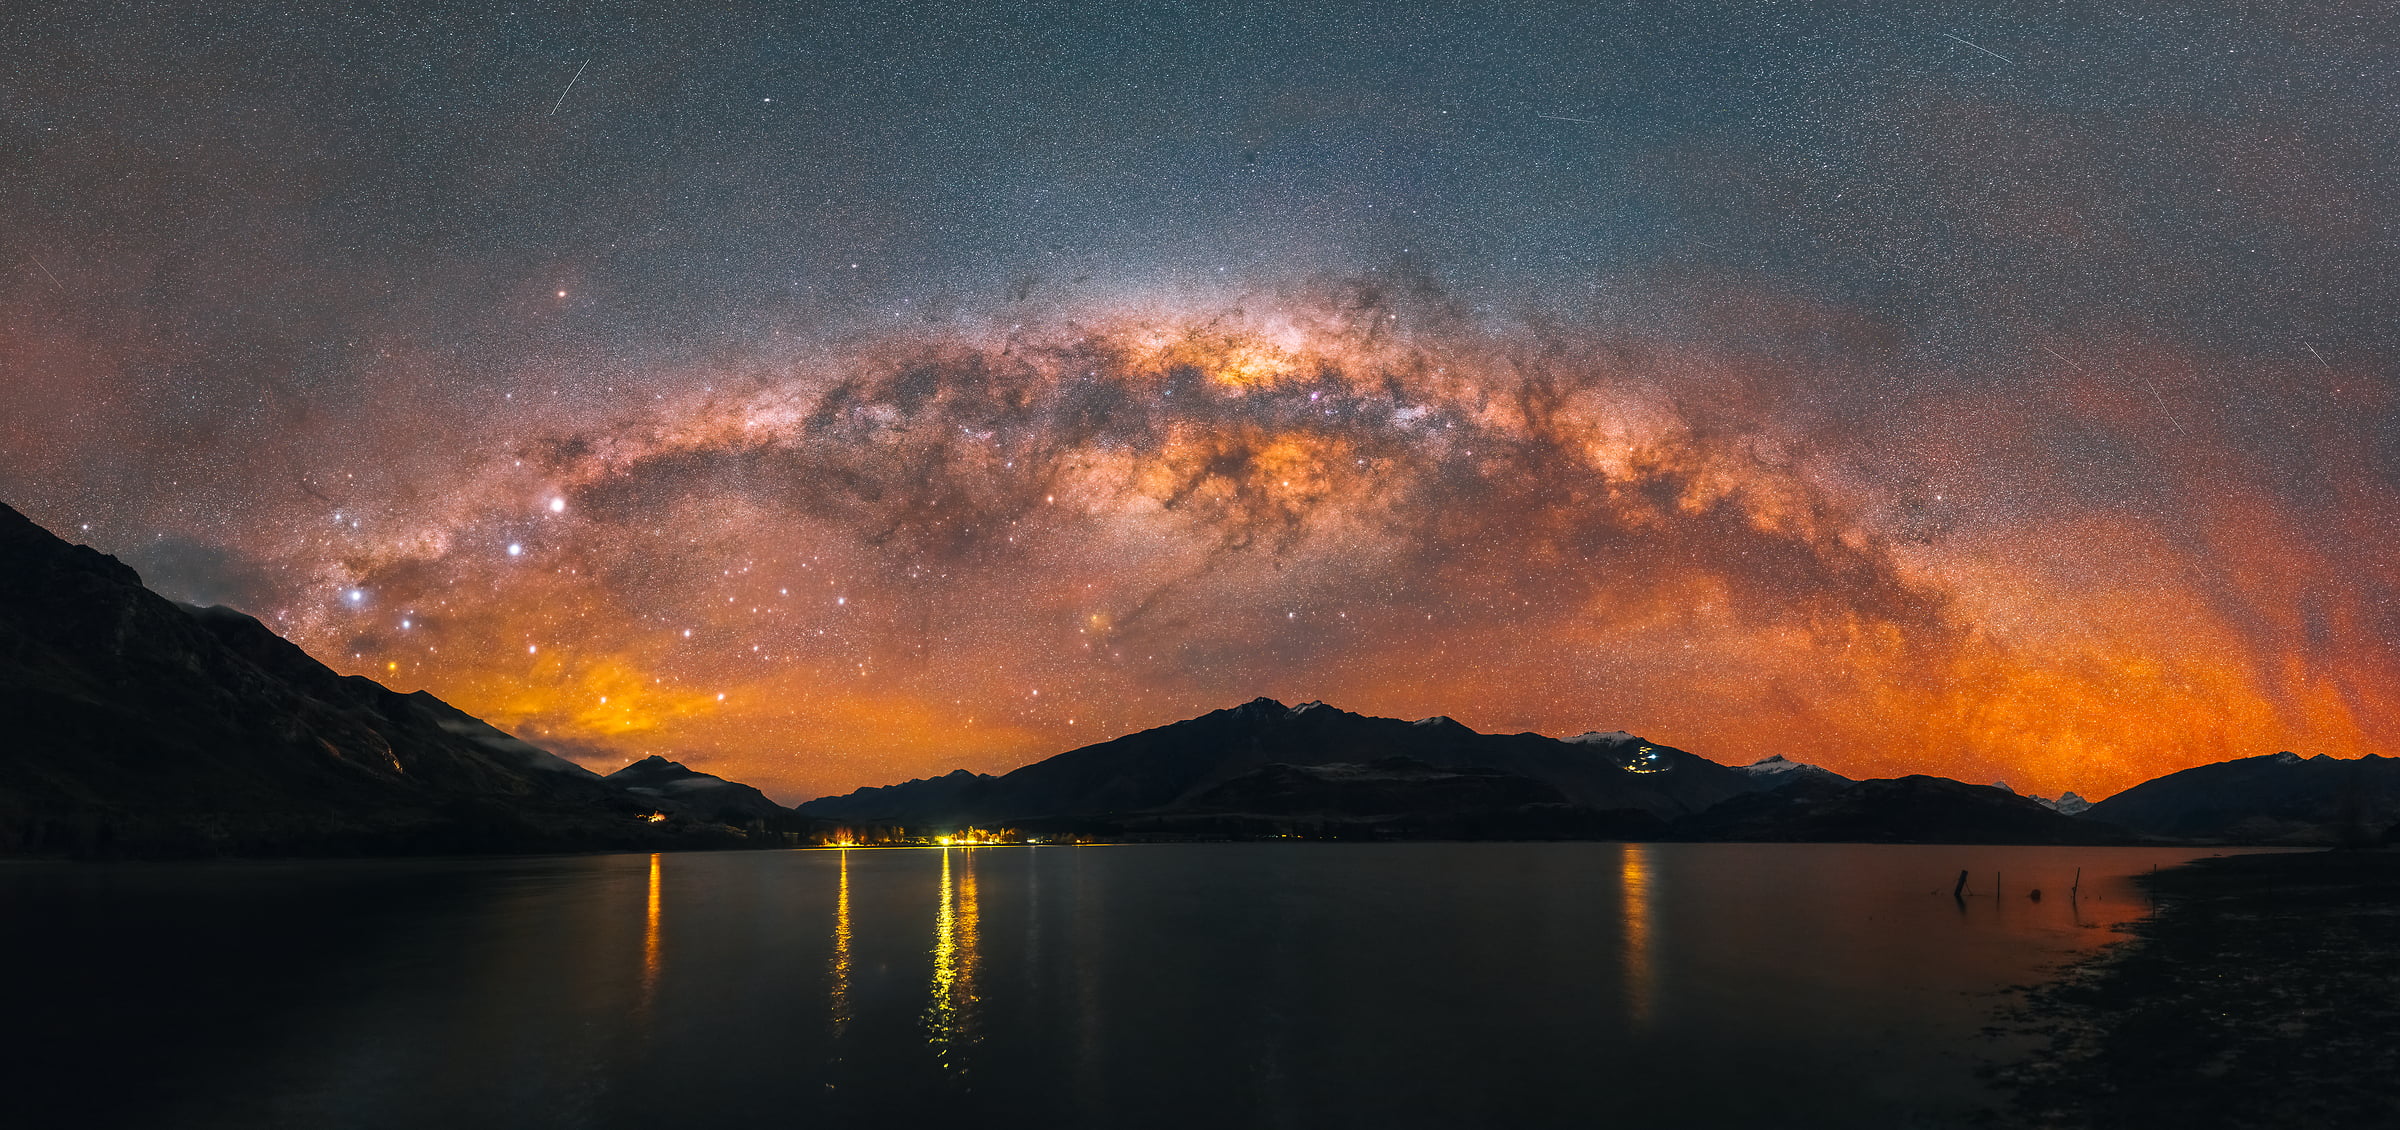 297 megapixels! A very high resolution, large-format VAST photo print of the night sky, milky way, and stars over mountains and a lake; fine art astrophotography landscape photo created by Paul Wilson in Lake Wanaka, New Zealand